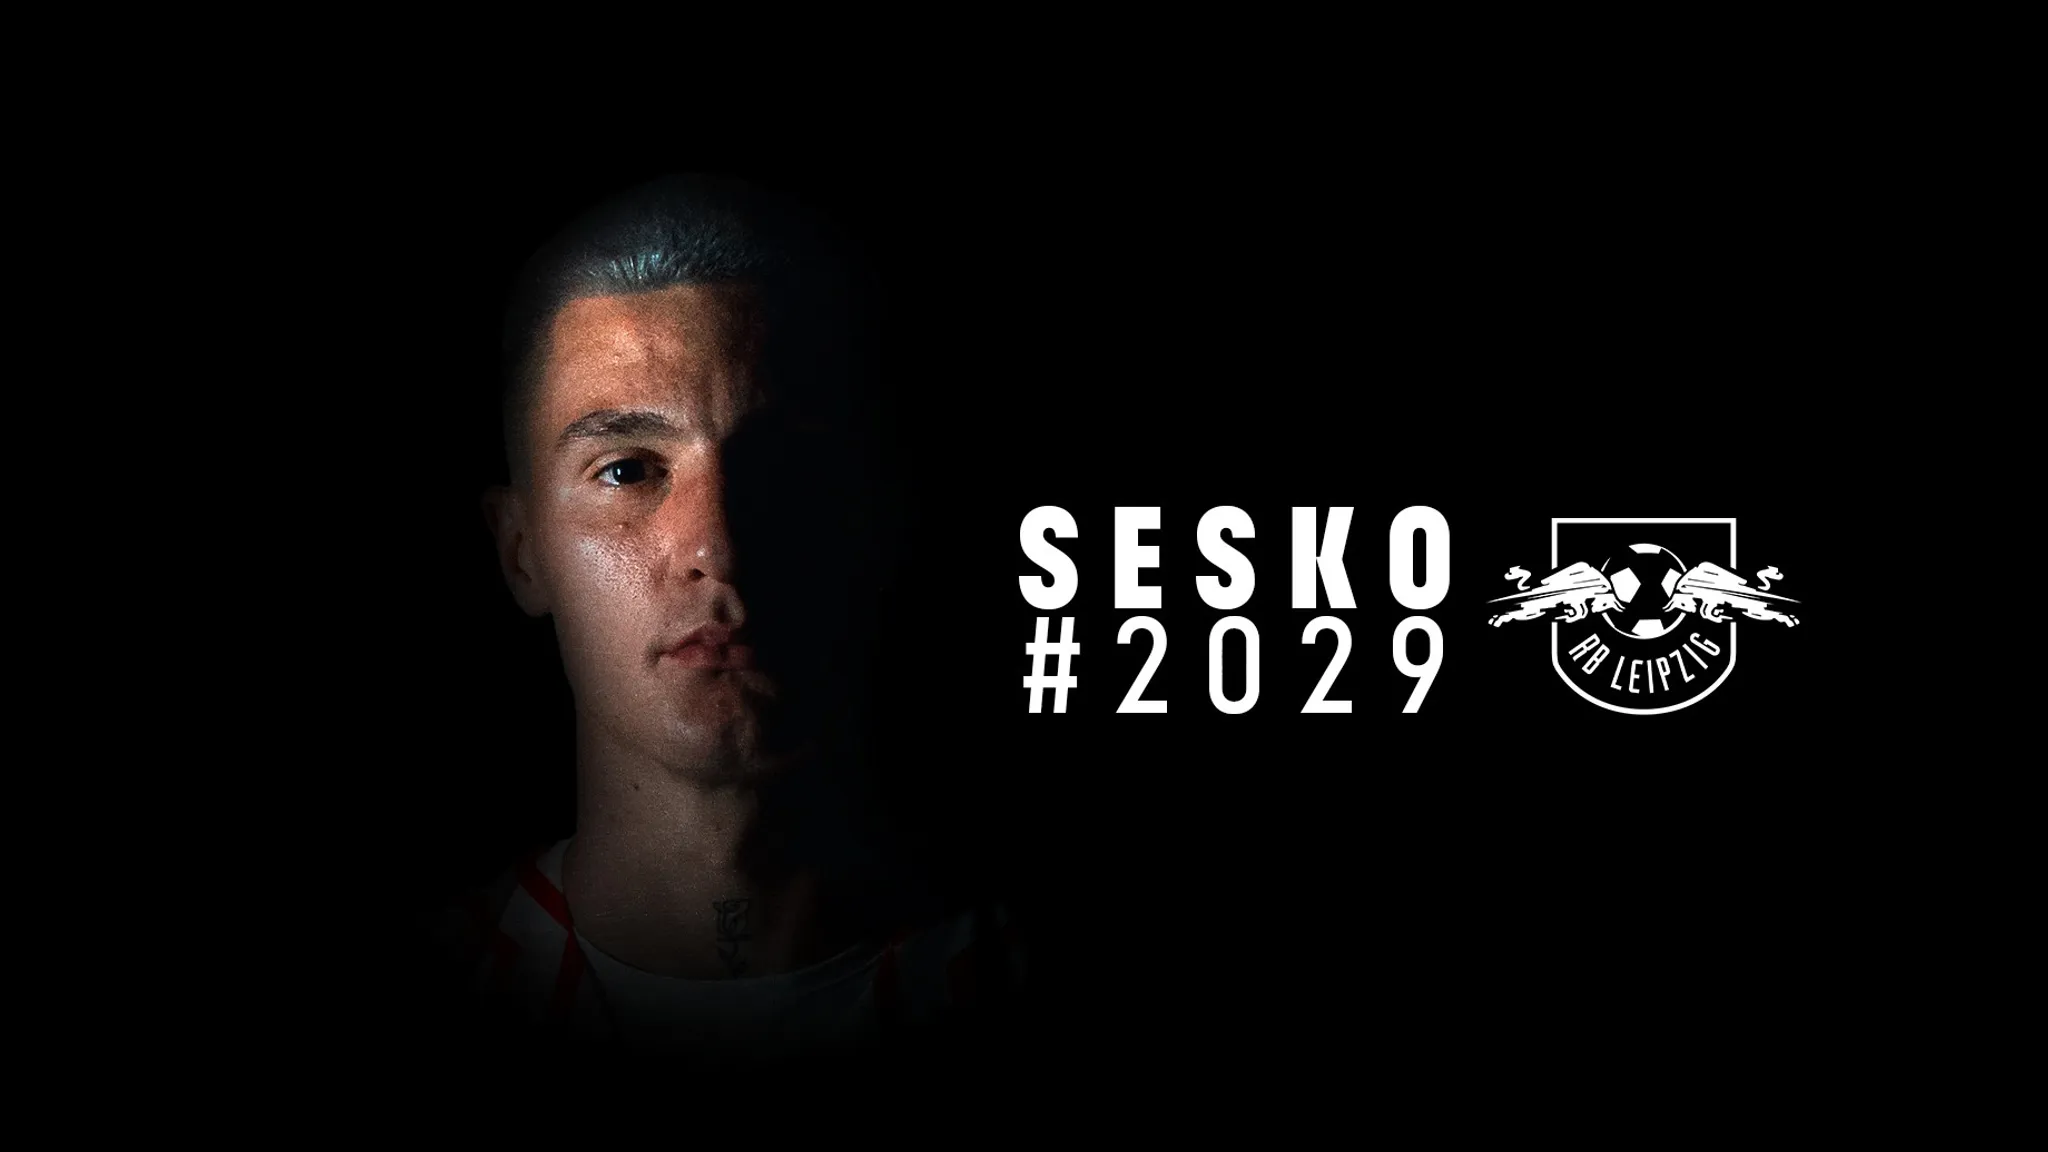 Benjamin Sesko has extended his contract with RB Leipzig to 2029.